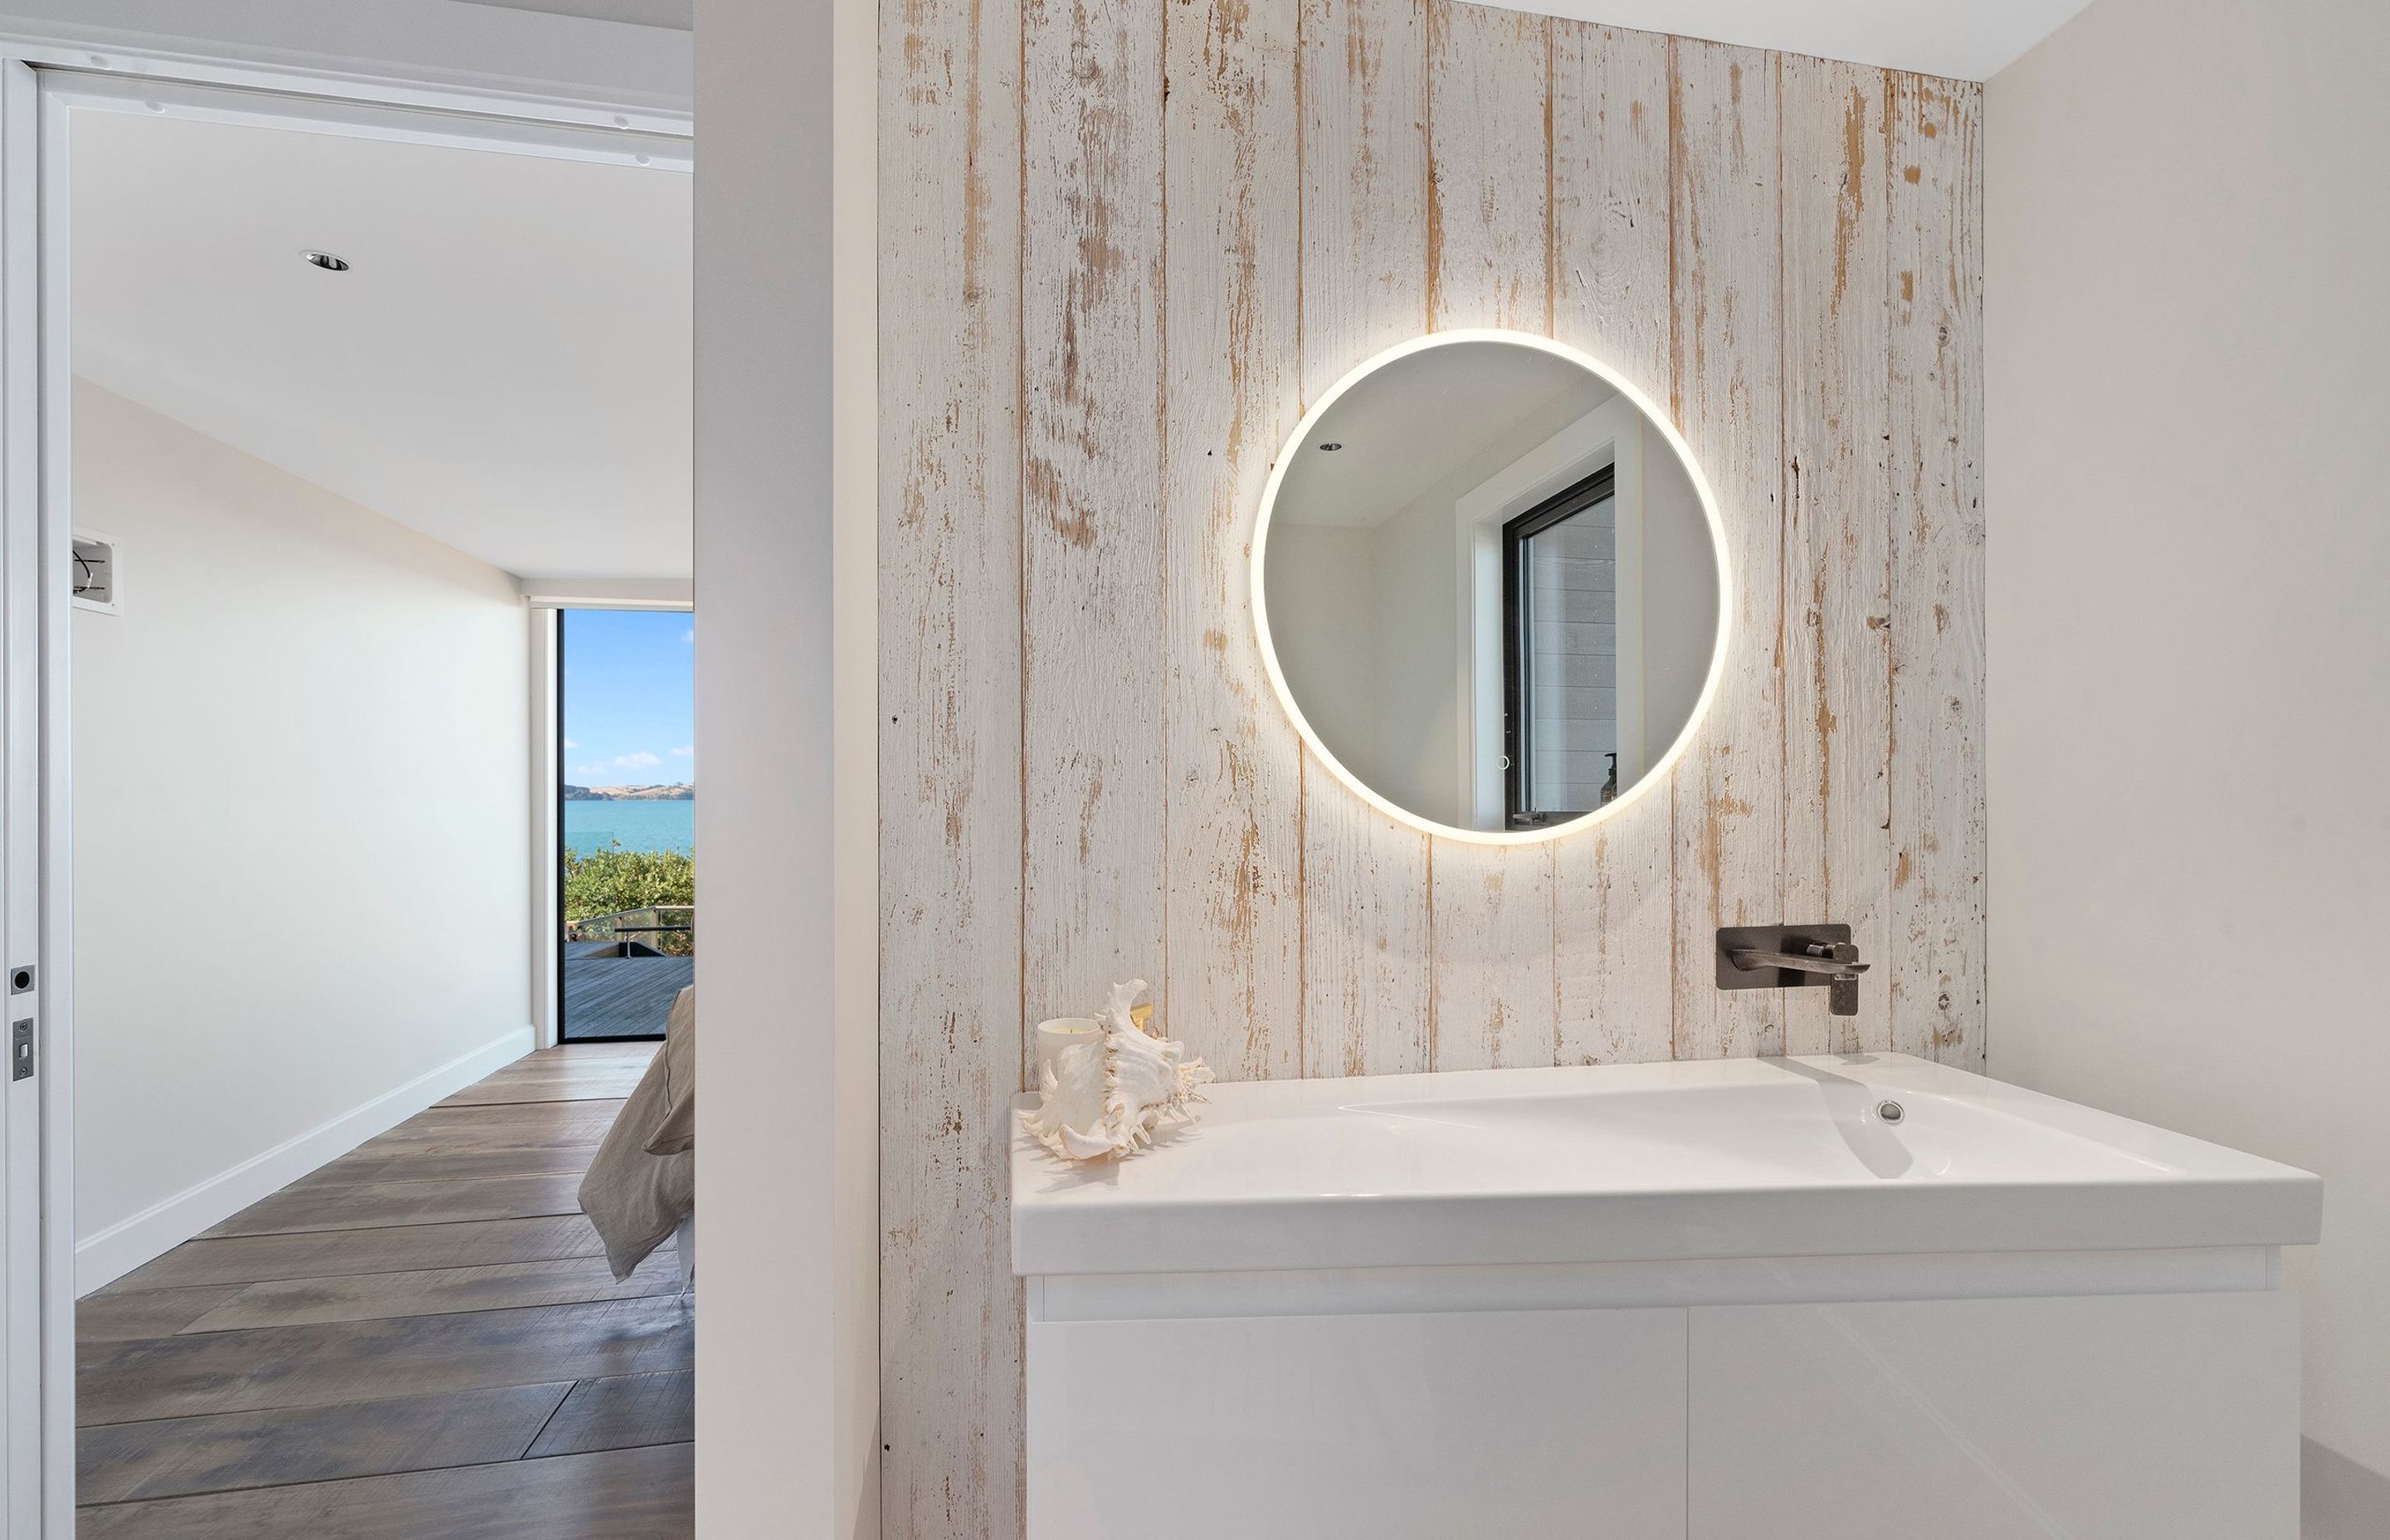 Recycled Canadian barn weatherboards were whitewashed and used as accent pieces in the bathroom and main bedroom.